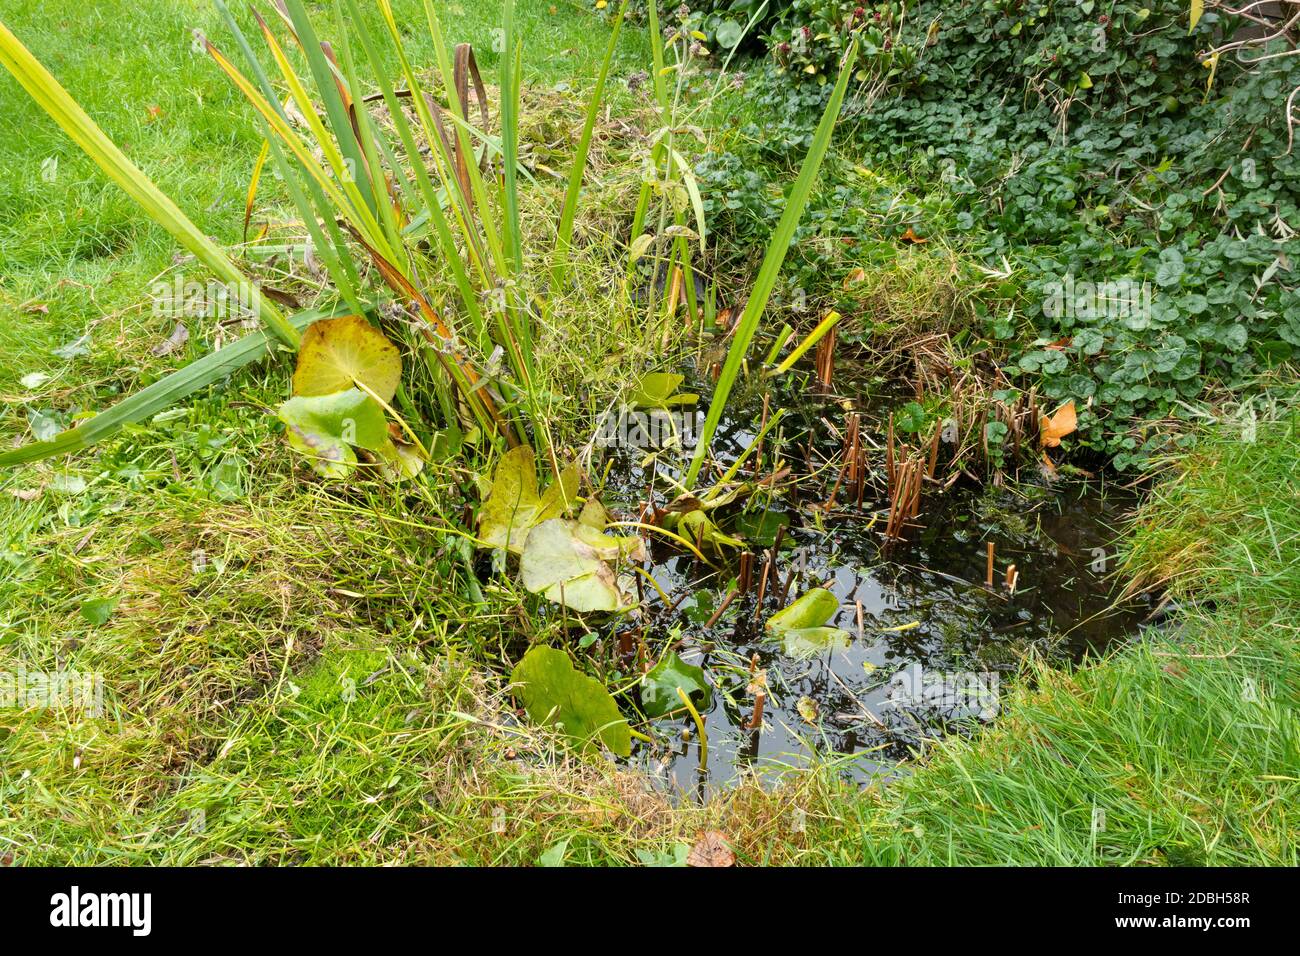 Maintaining a garden wildlife pond in autumn 3, UK. A small garden pond after clearing and trimming excess overgrown pond plants. Stock Photo